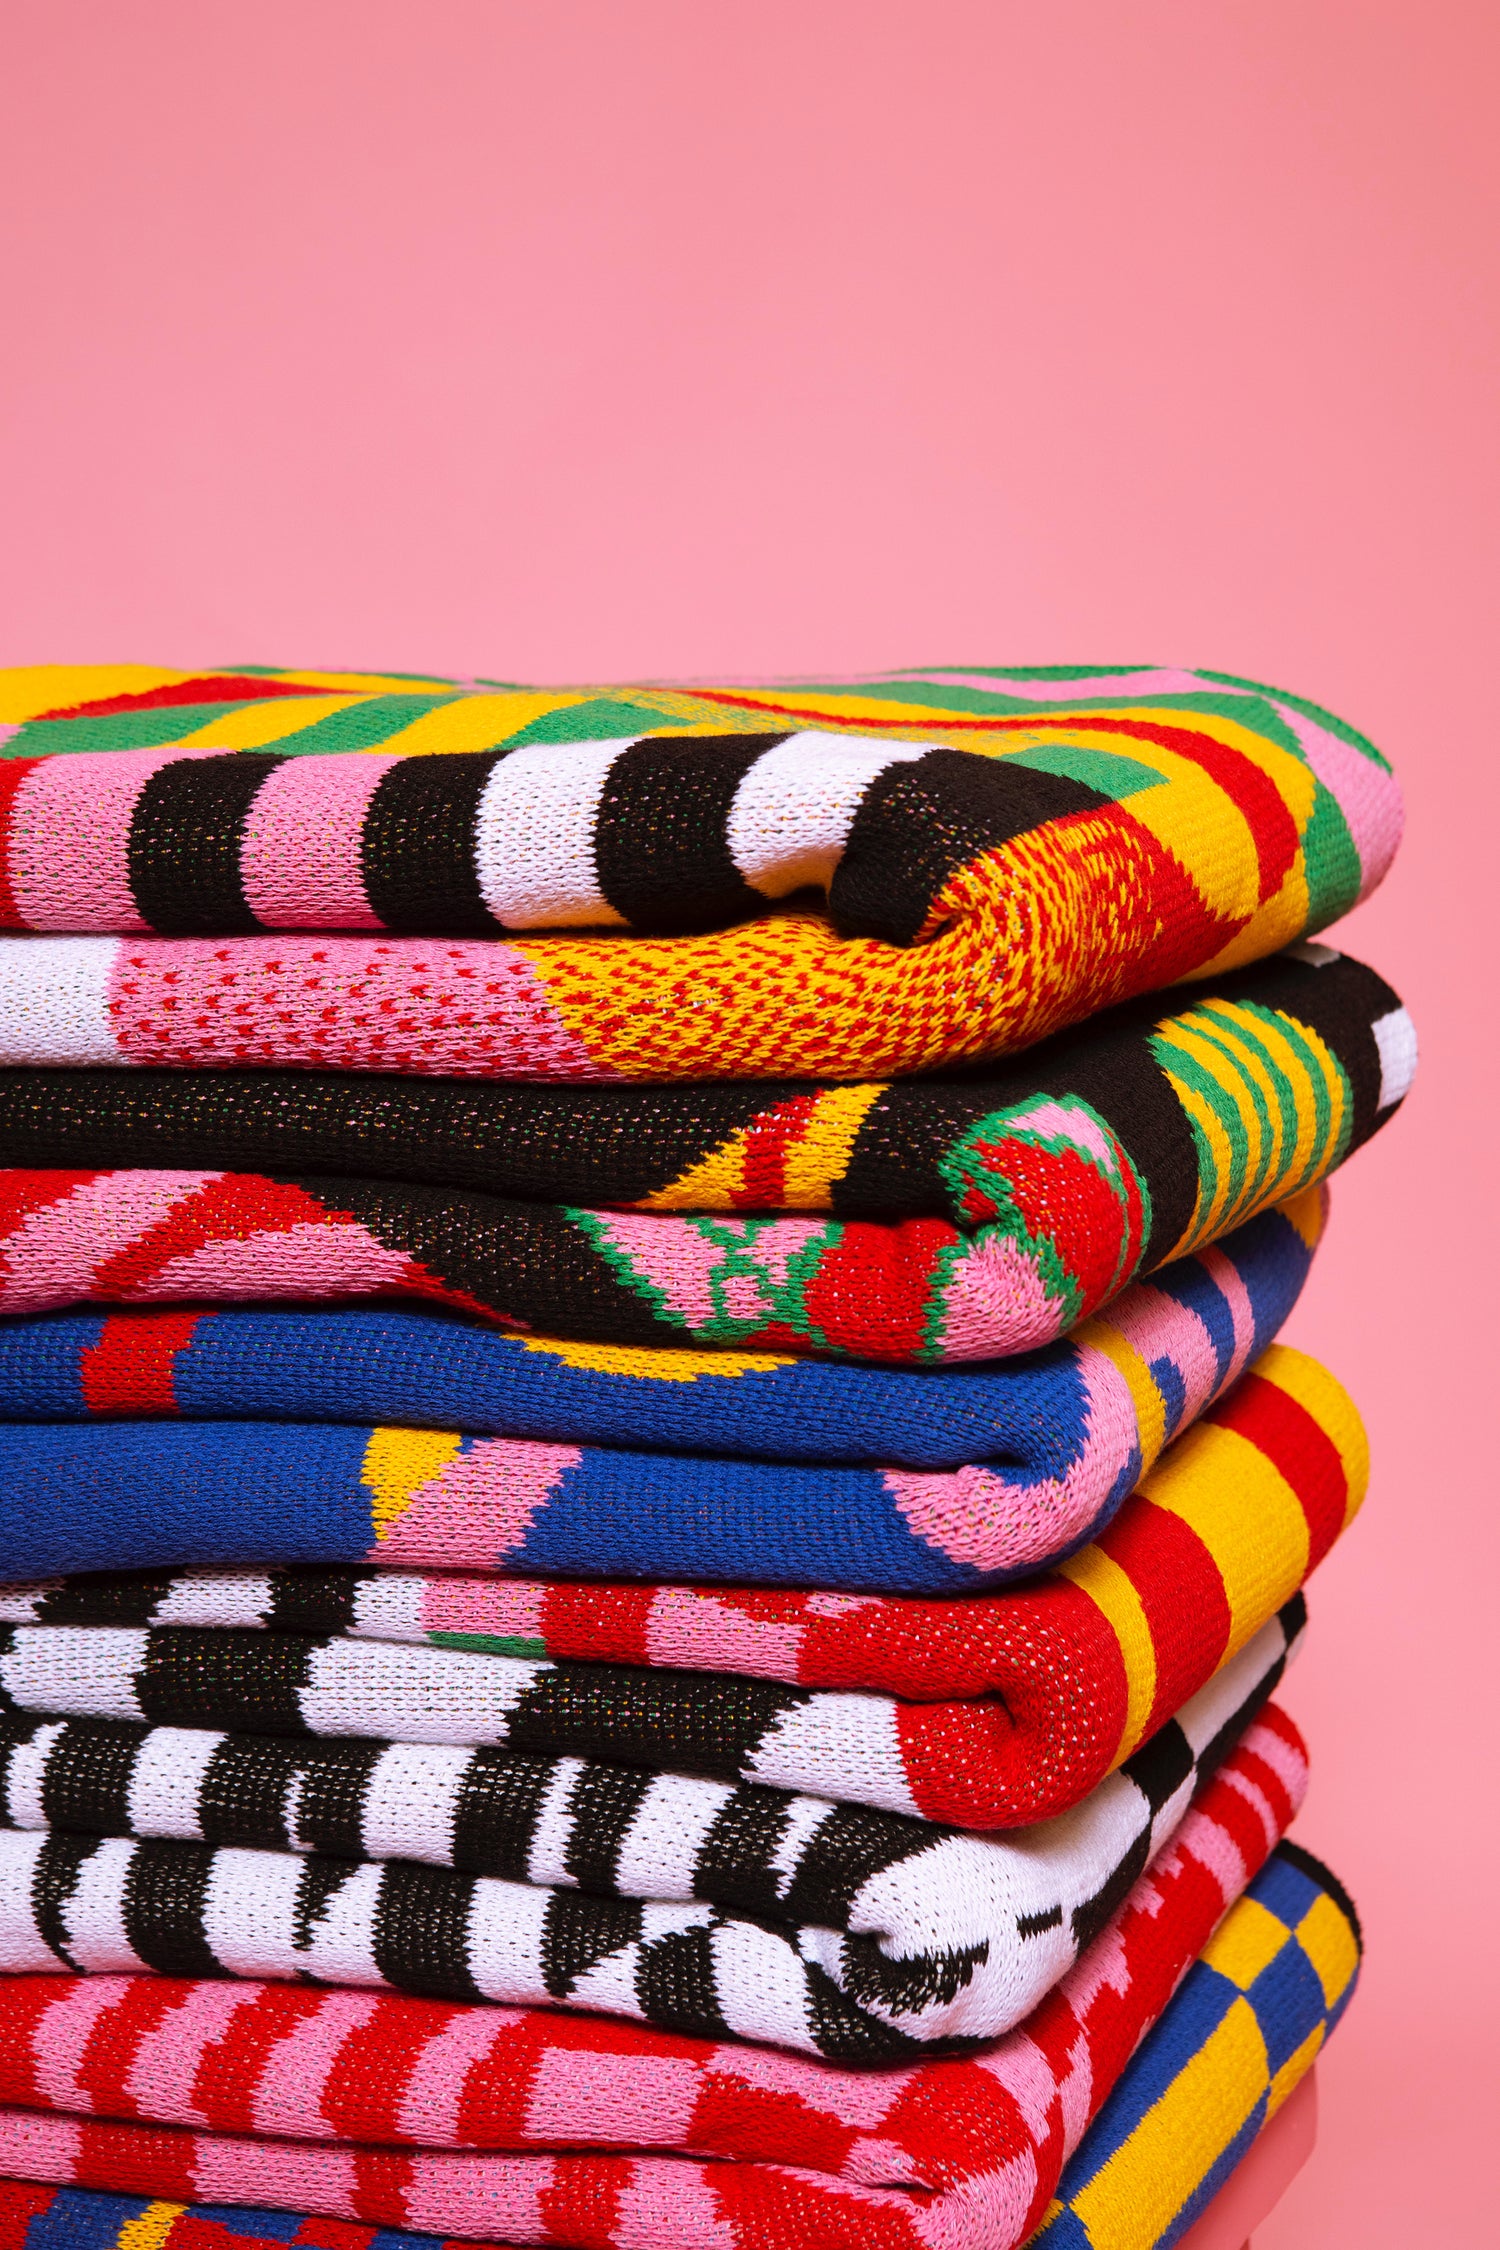 The Dazzle Blanket shown a stack of blankets against a pink ground. This stack is 7 blankets high.